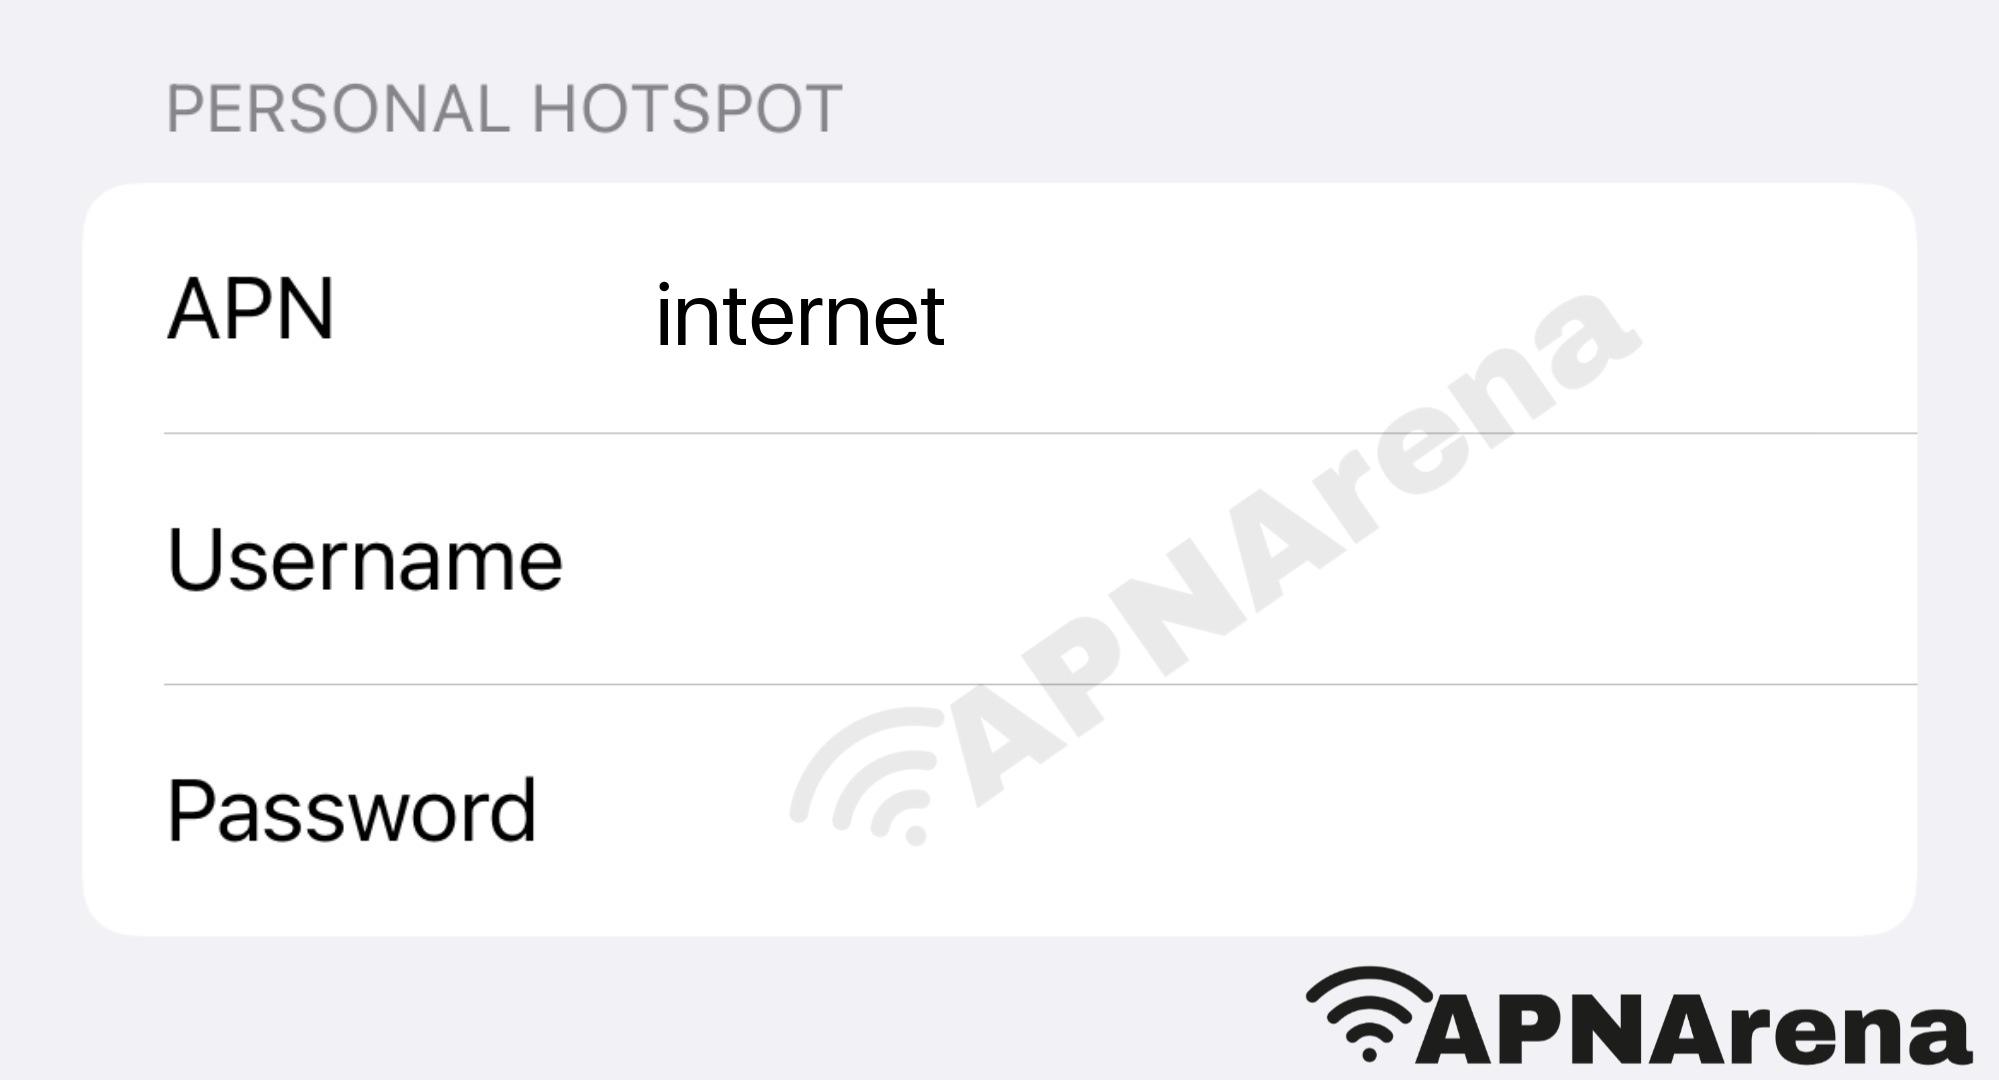 GIV Mobile Personal Hotspot Settings for iPhone